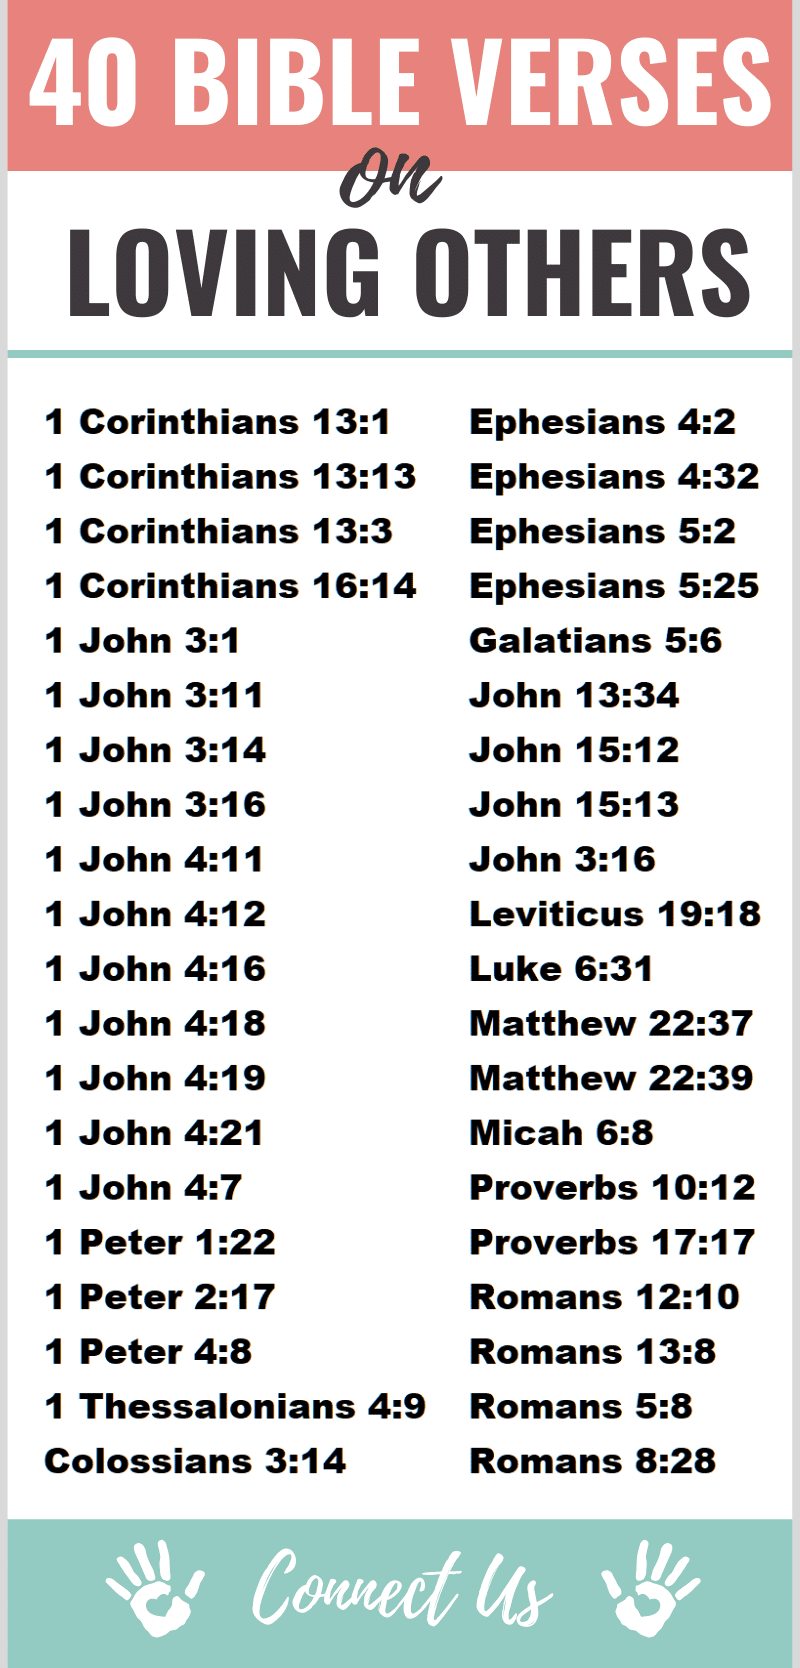 Bible Verses on Loving Others